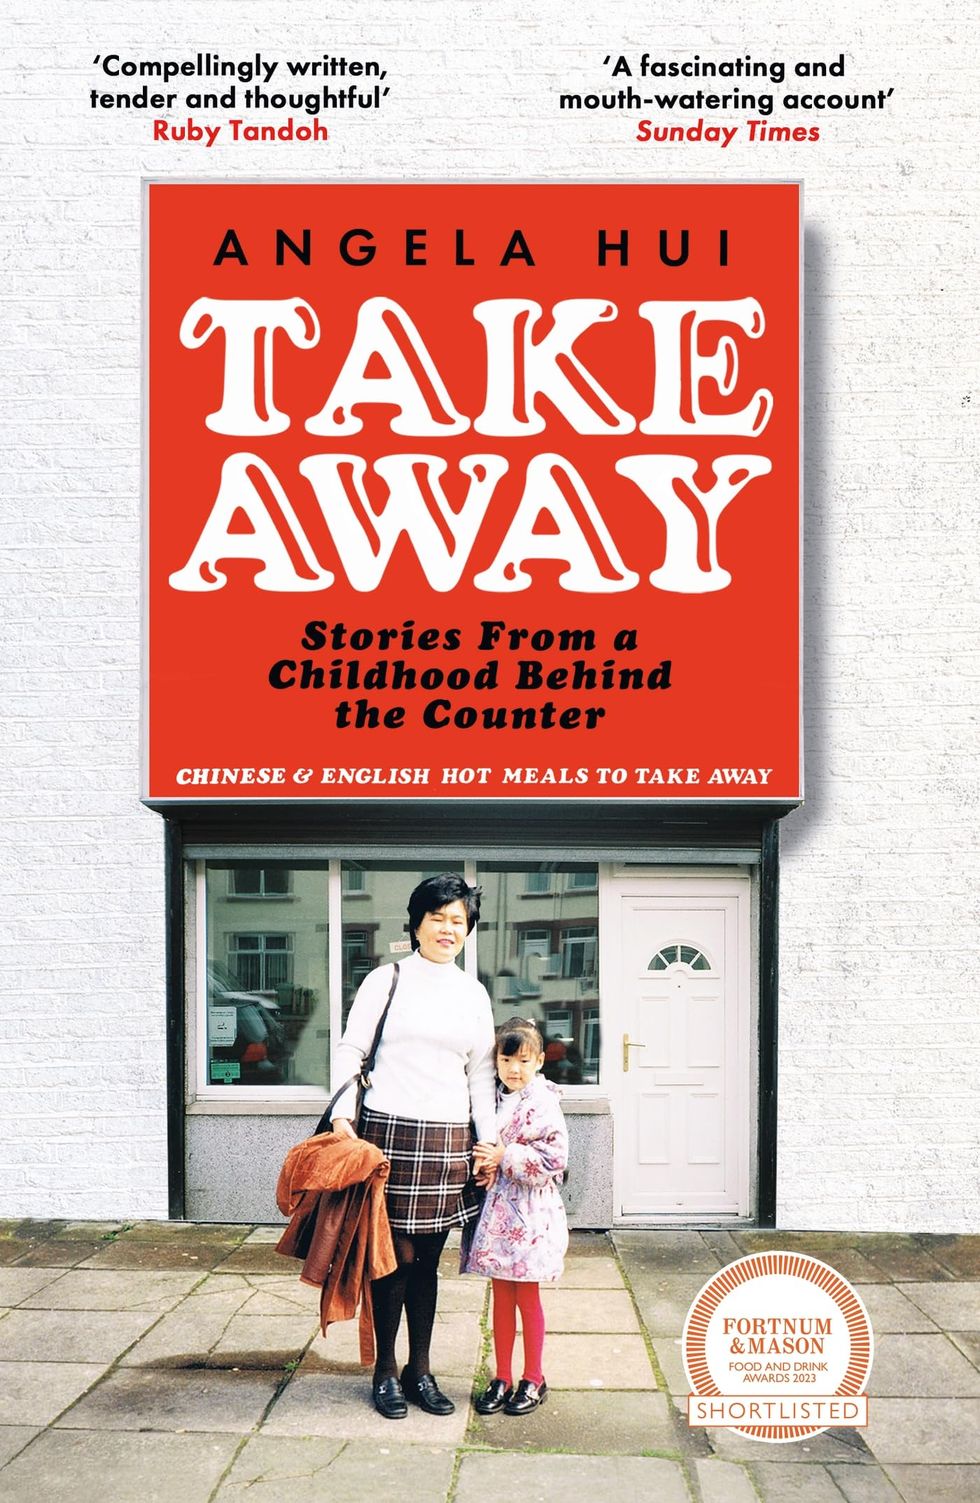 Takeaway: Stories from a childhood behind the counter by Angela Hui